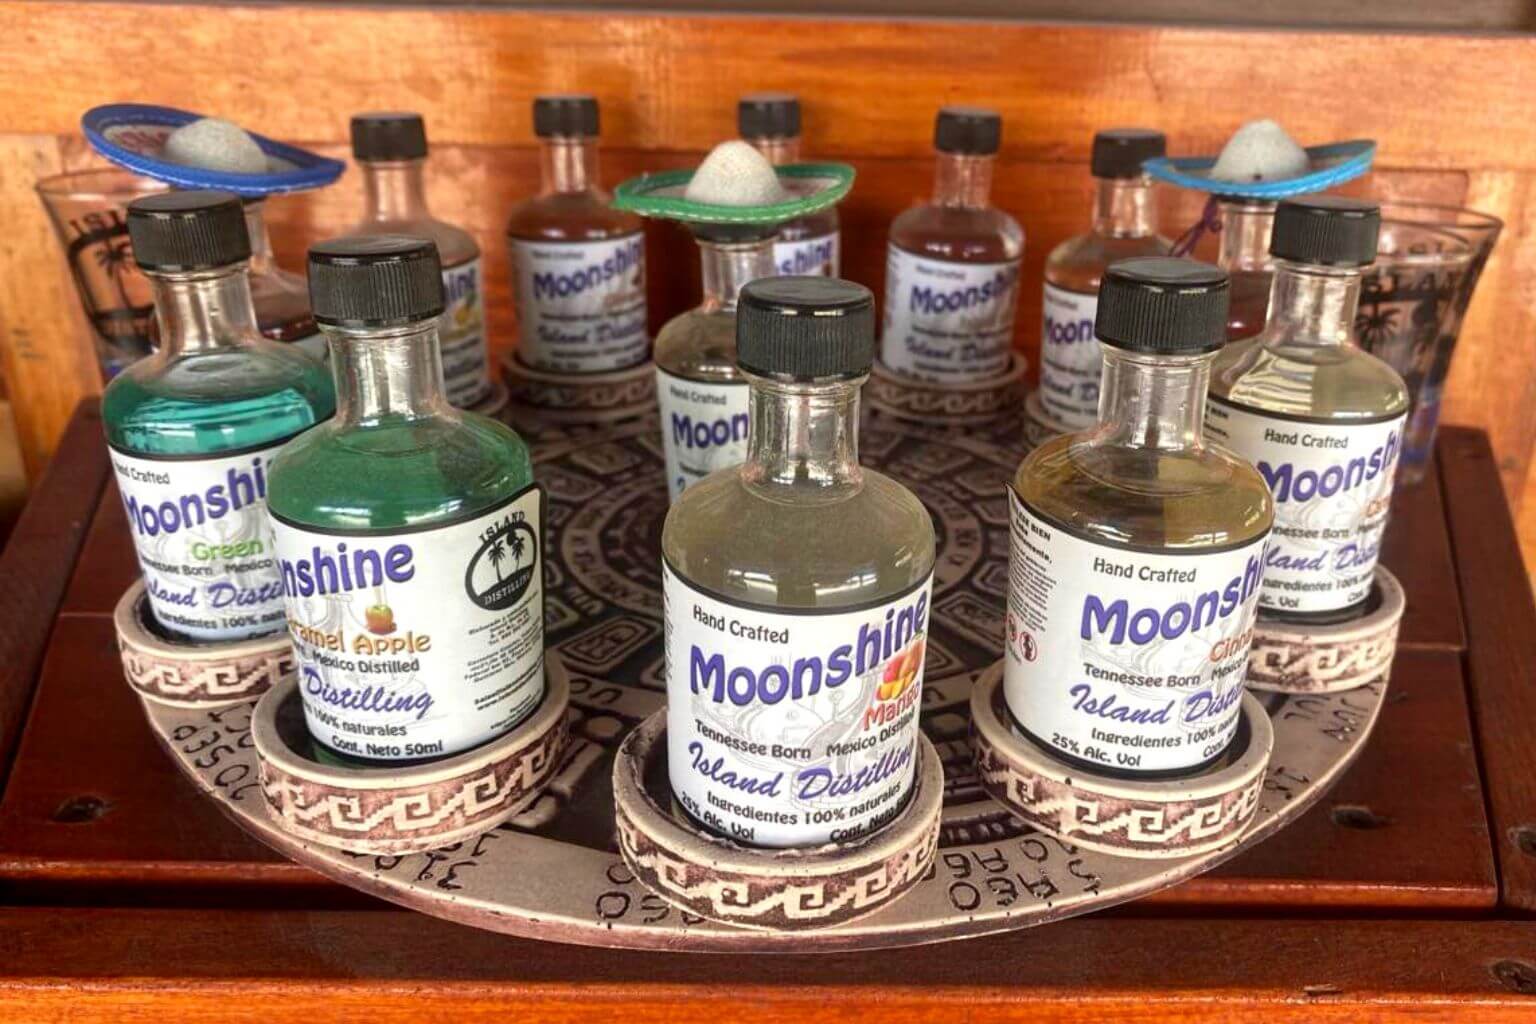 A platter of 13 different flavors of Mexican Moonshine, displayed in the Island Distilling shop.